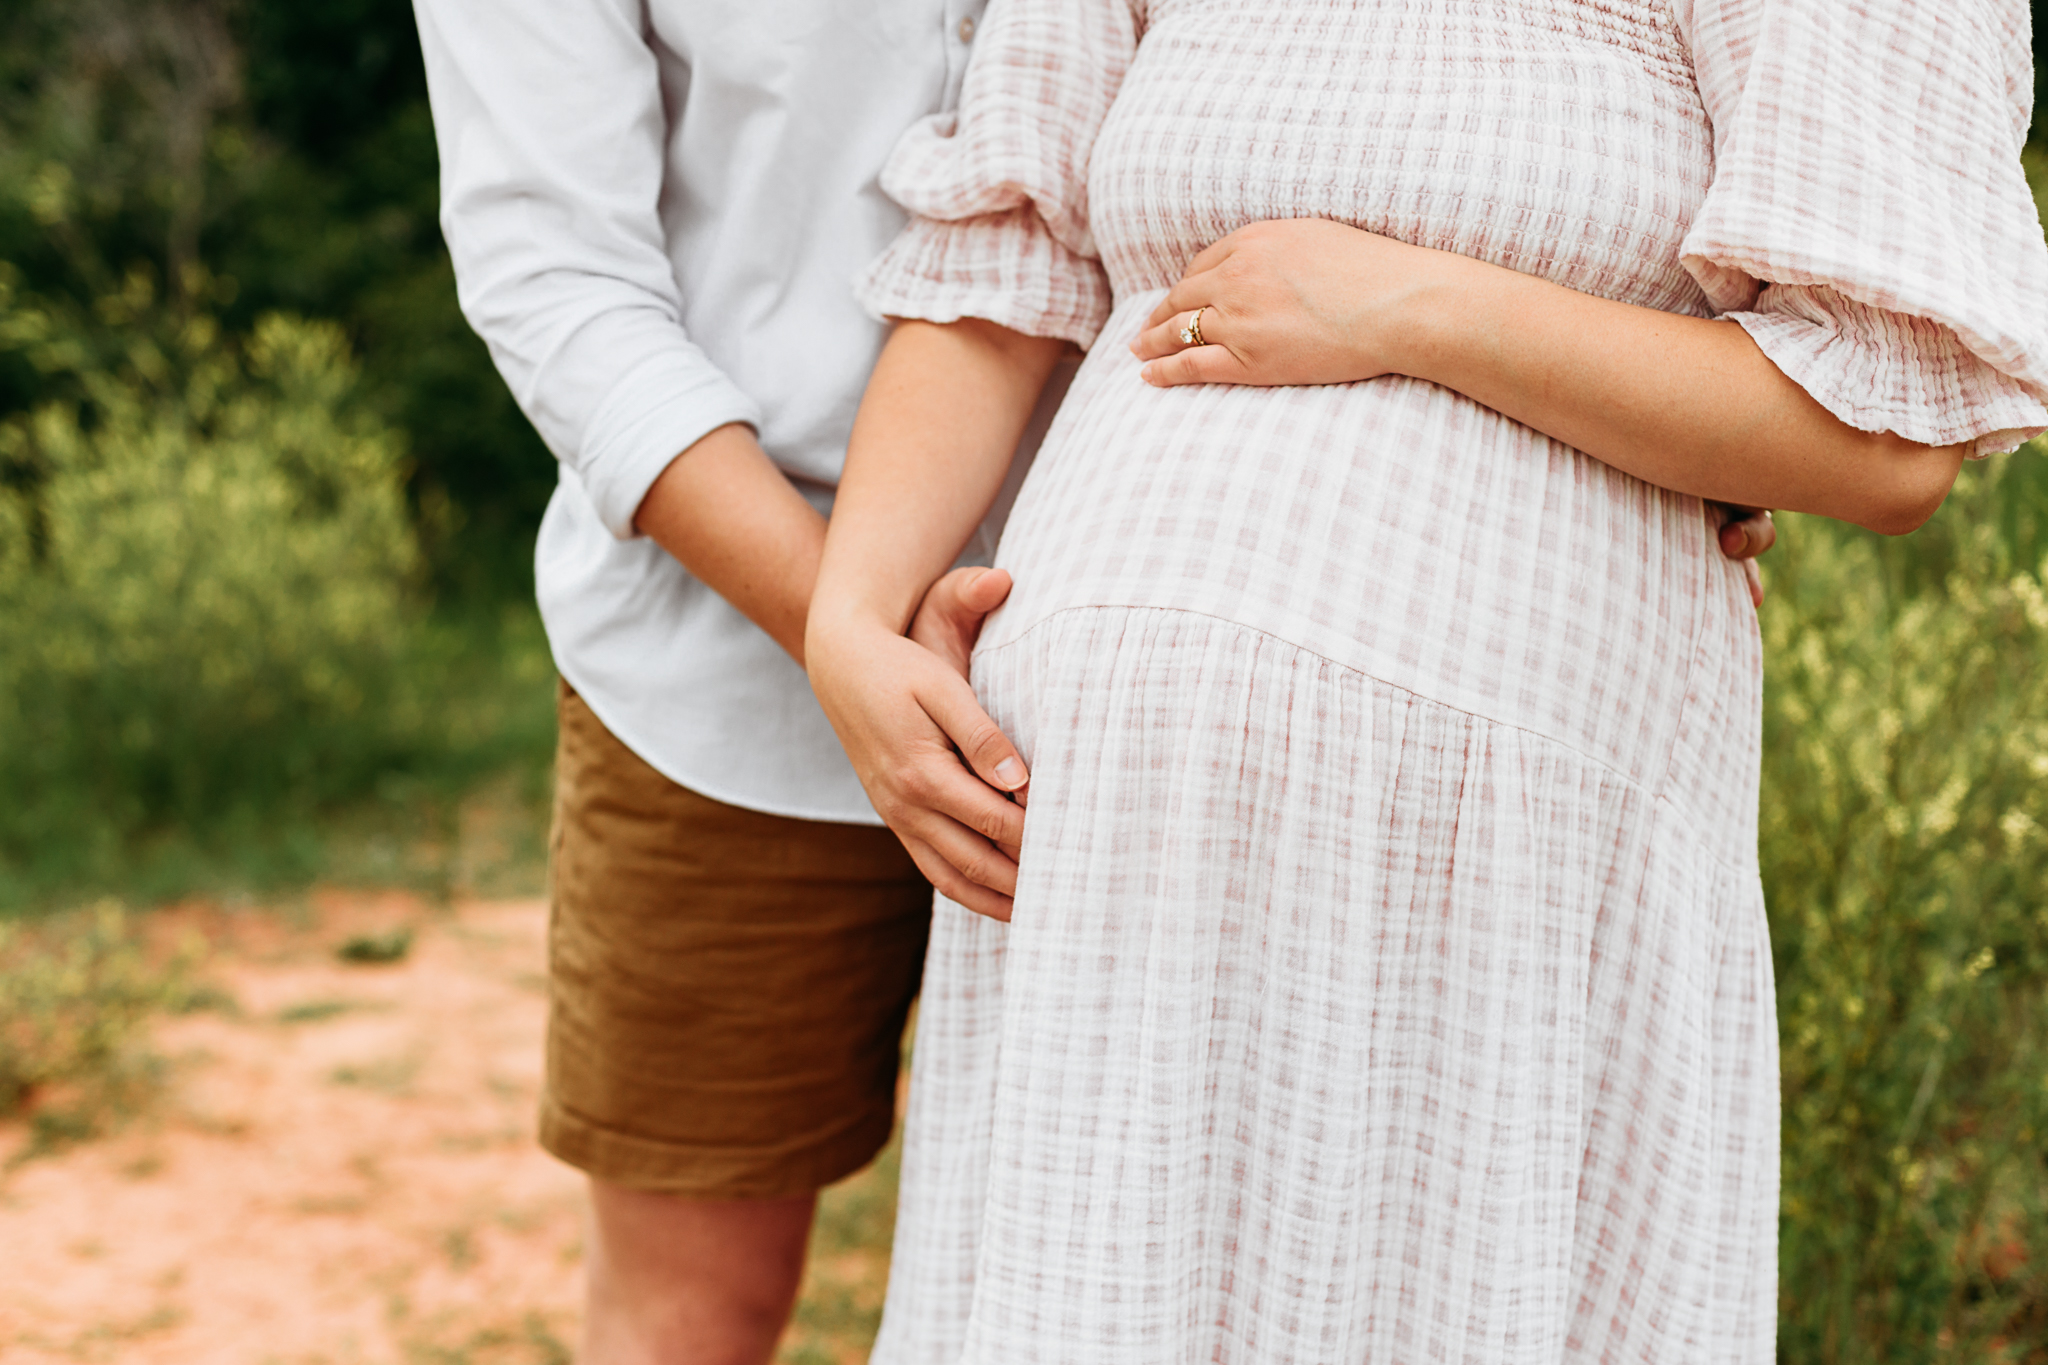 5 tips for what to wear to for a lifestyle maternity photo session BJ9A0198